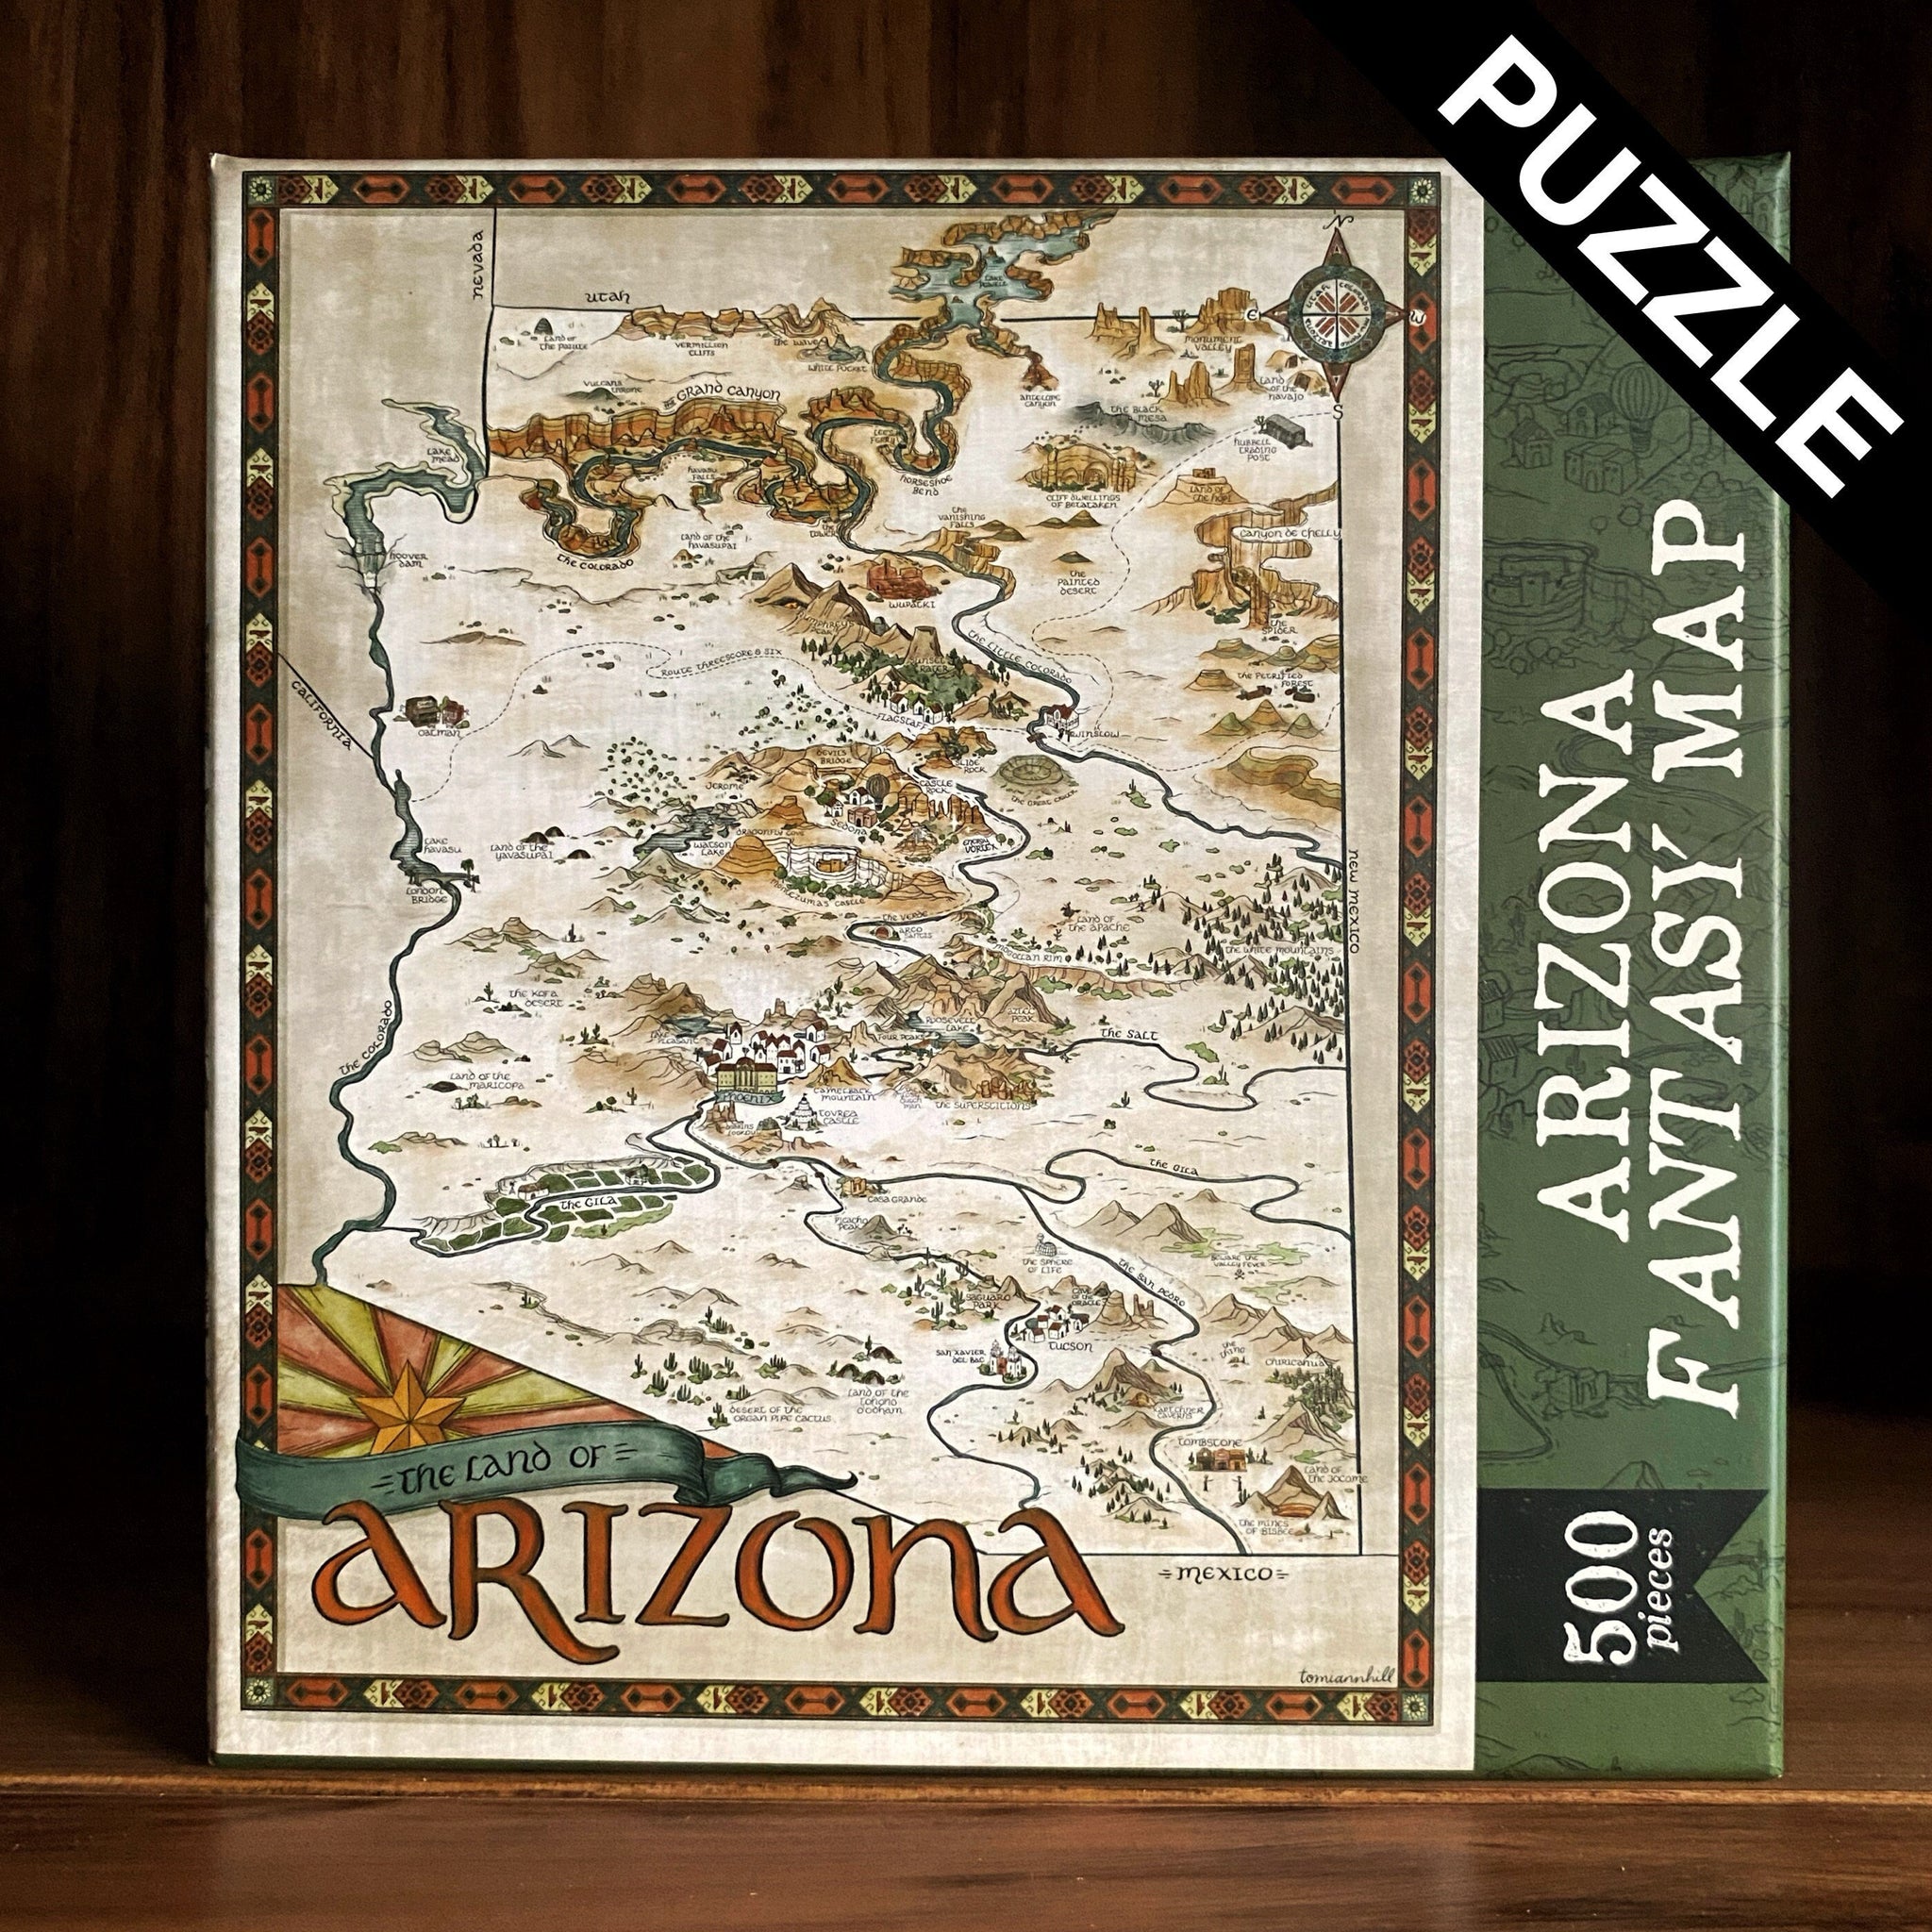 Image shows a 500 piece puzzle with a hand-drawn fantasy-style map of Arizona